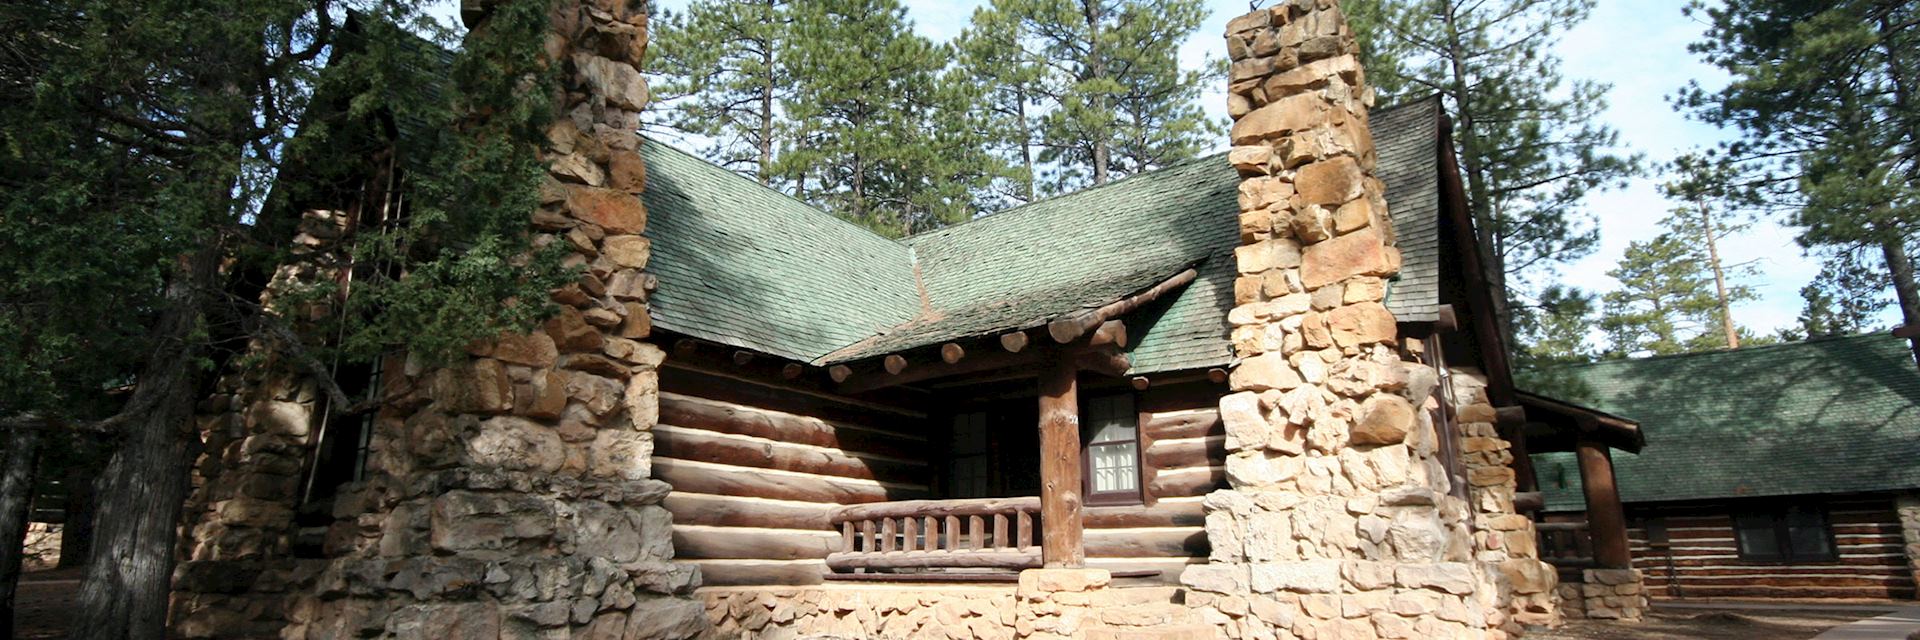 Western Cabins, The Lodge at Bryce Canyon